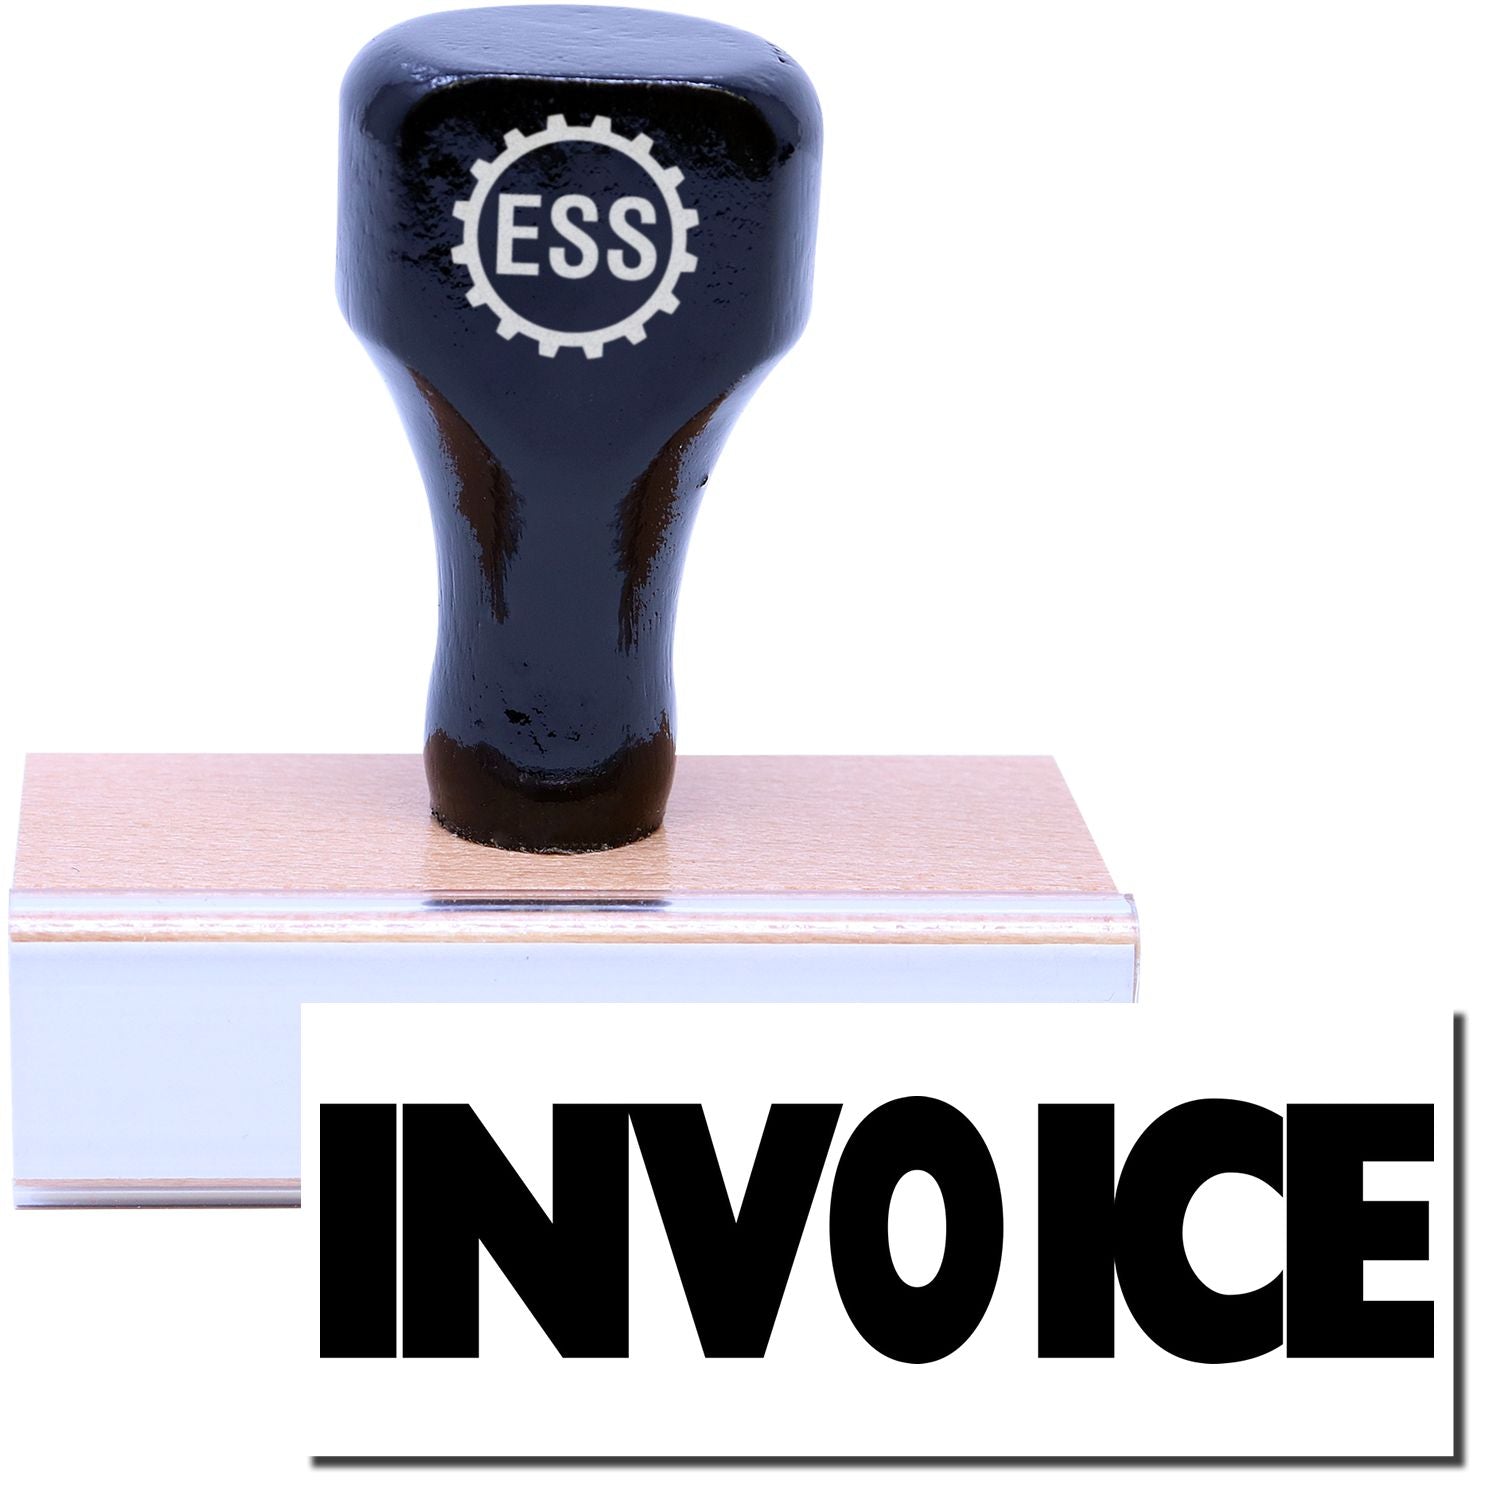 A stock office rubber stamp with a stamped image showing how the text "INVOICE" in a large font is displayed after stamping.